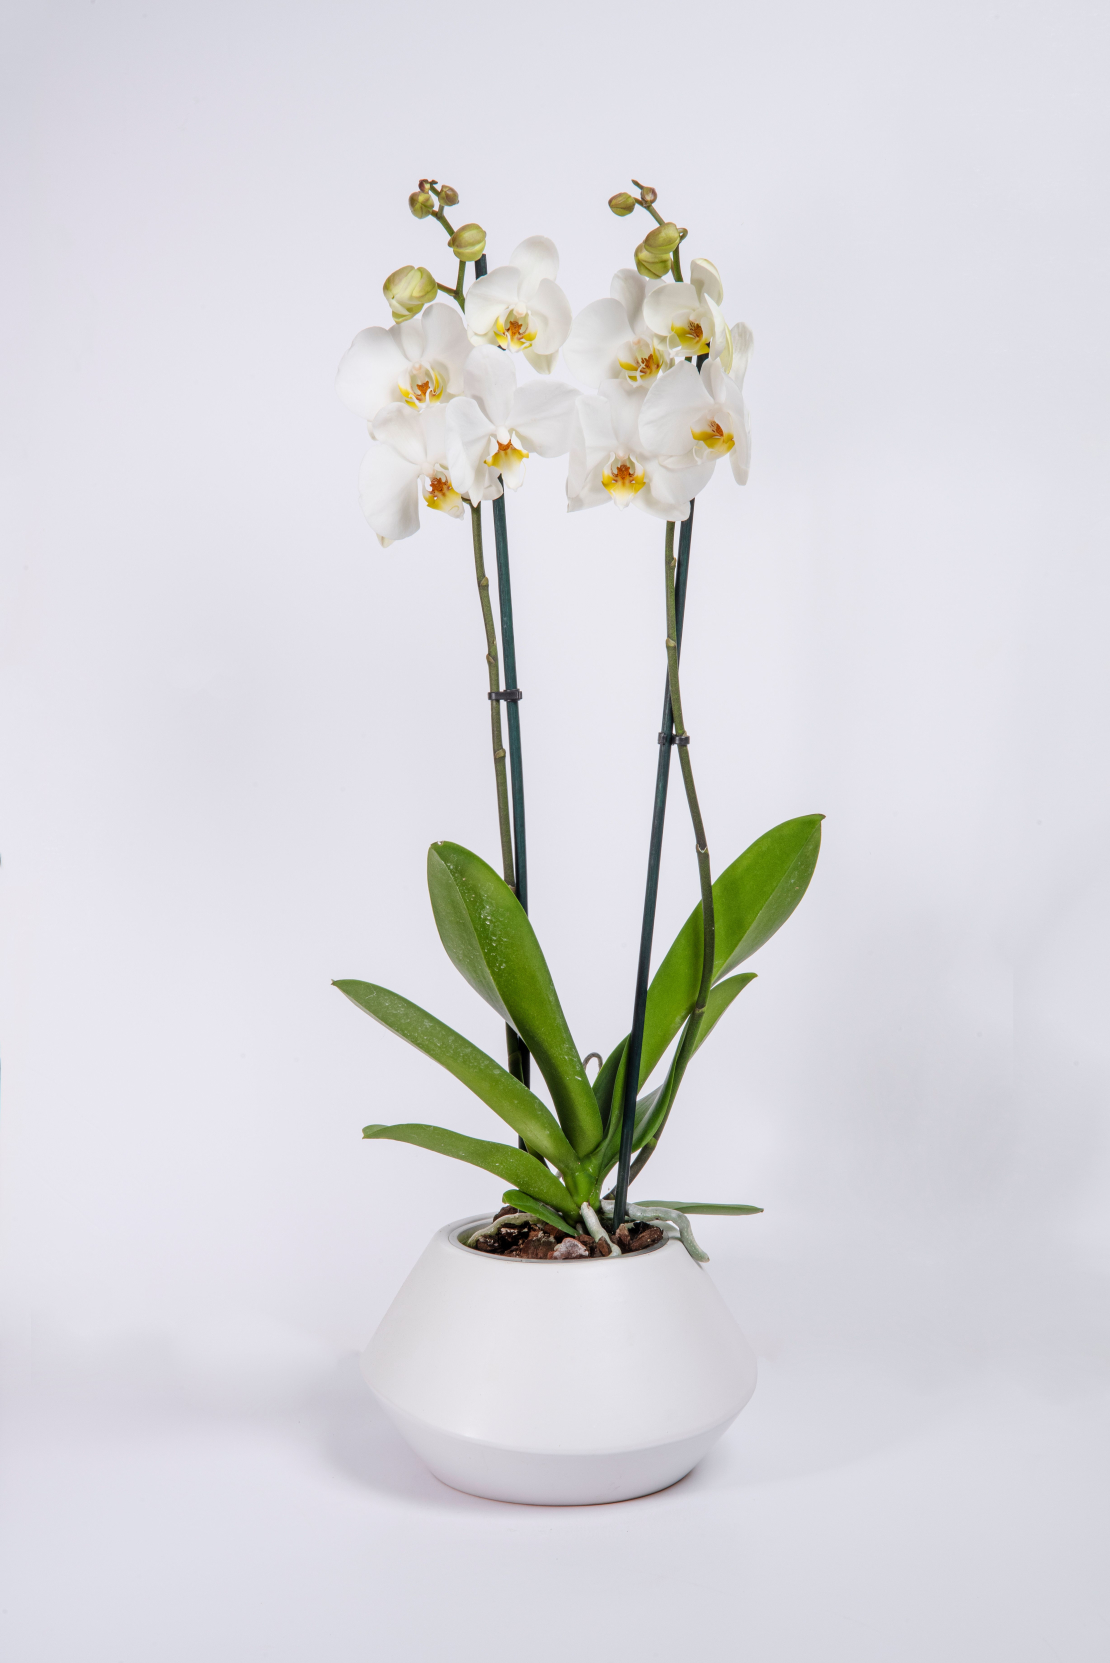 Tall White Orchid with Two Branches